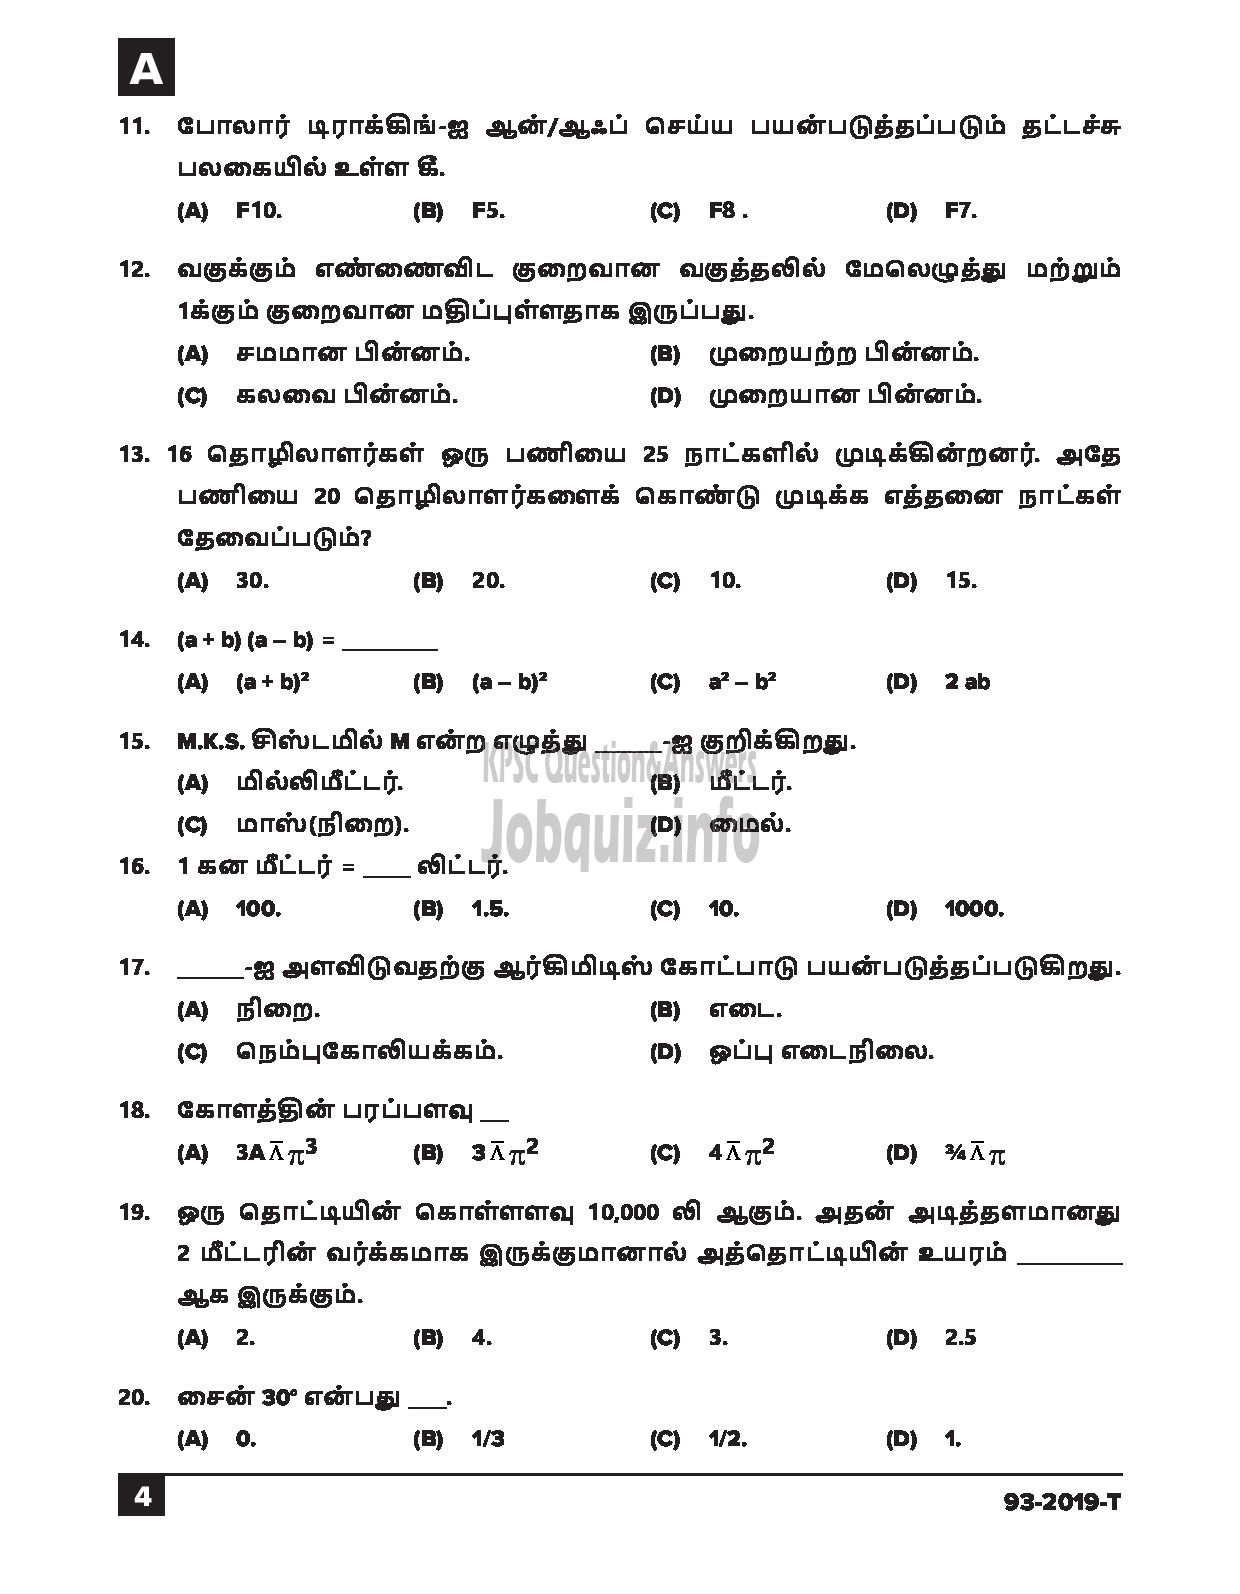 Kerala PSC Question Paper - Workshop Attender (Architectural Assistant) SR From SC/ST Industrial Training Tamil-4